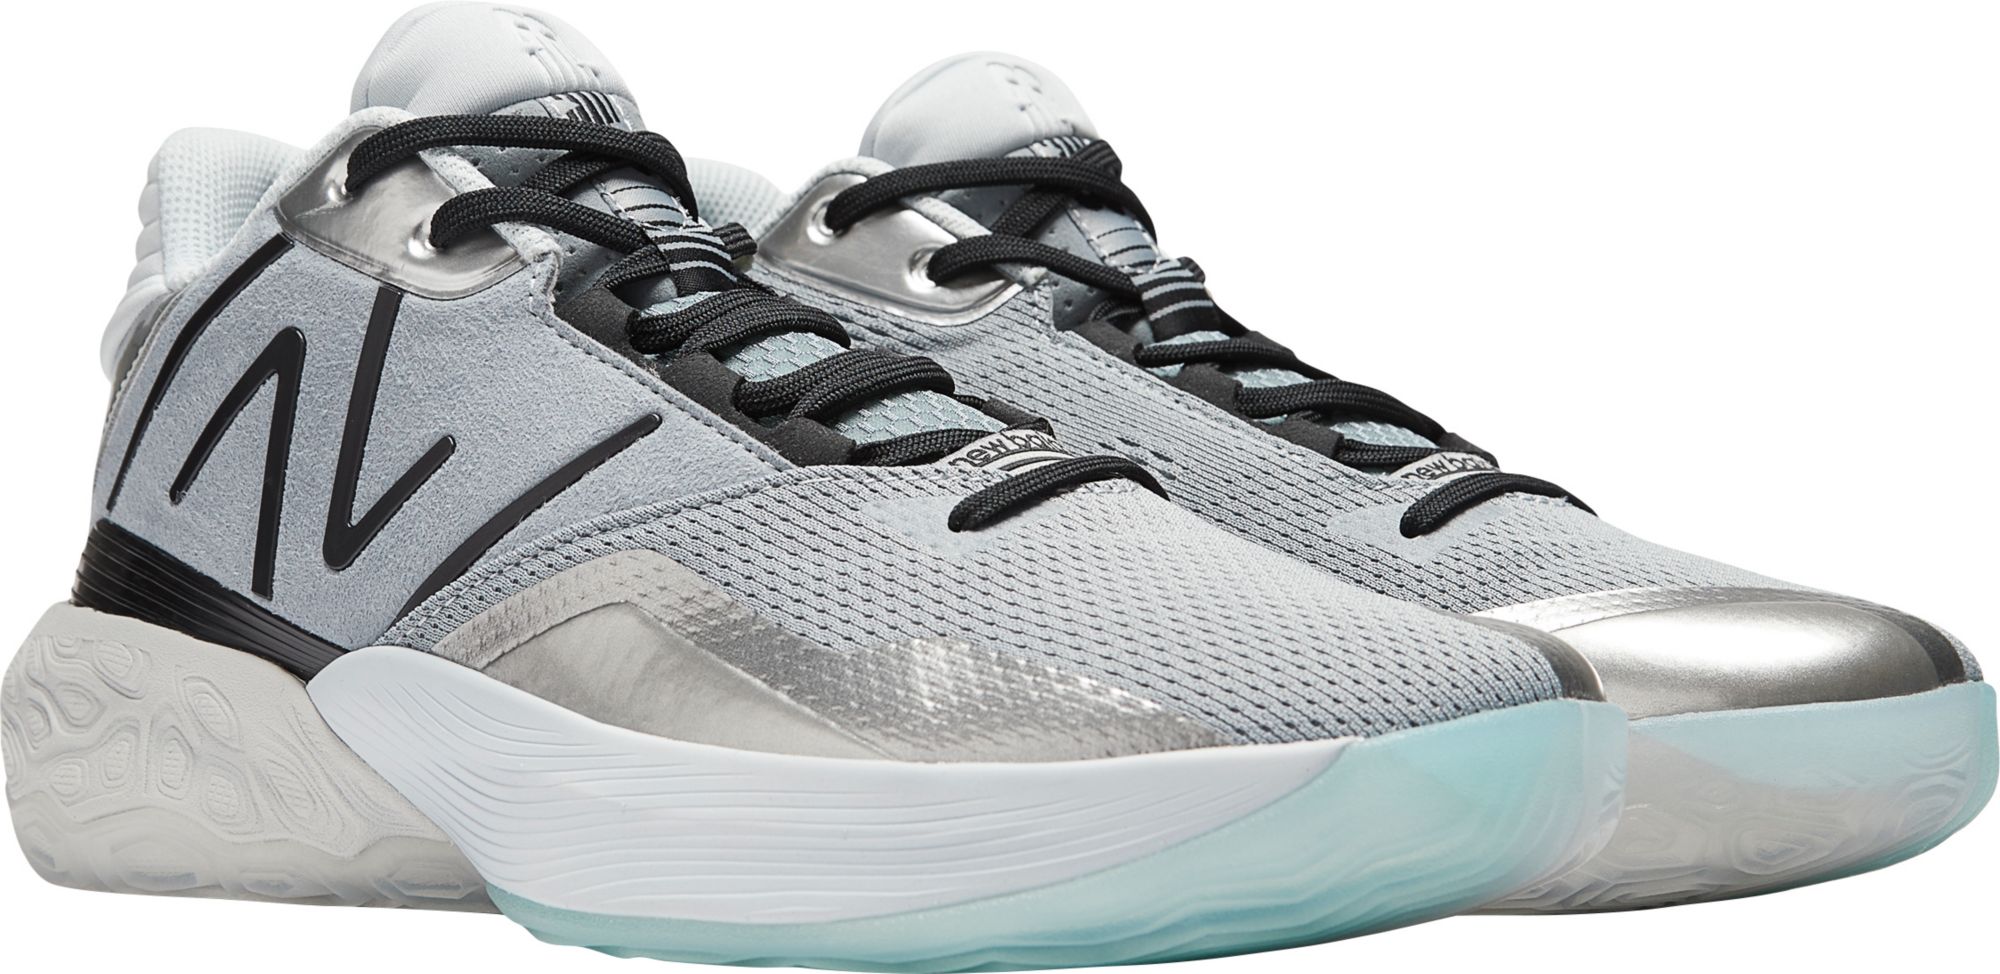 New Balance TWO WXY v4 Basketball Shoes | The Market Place